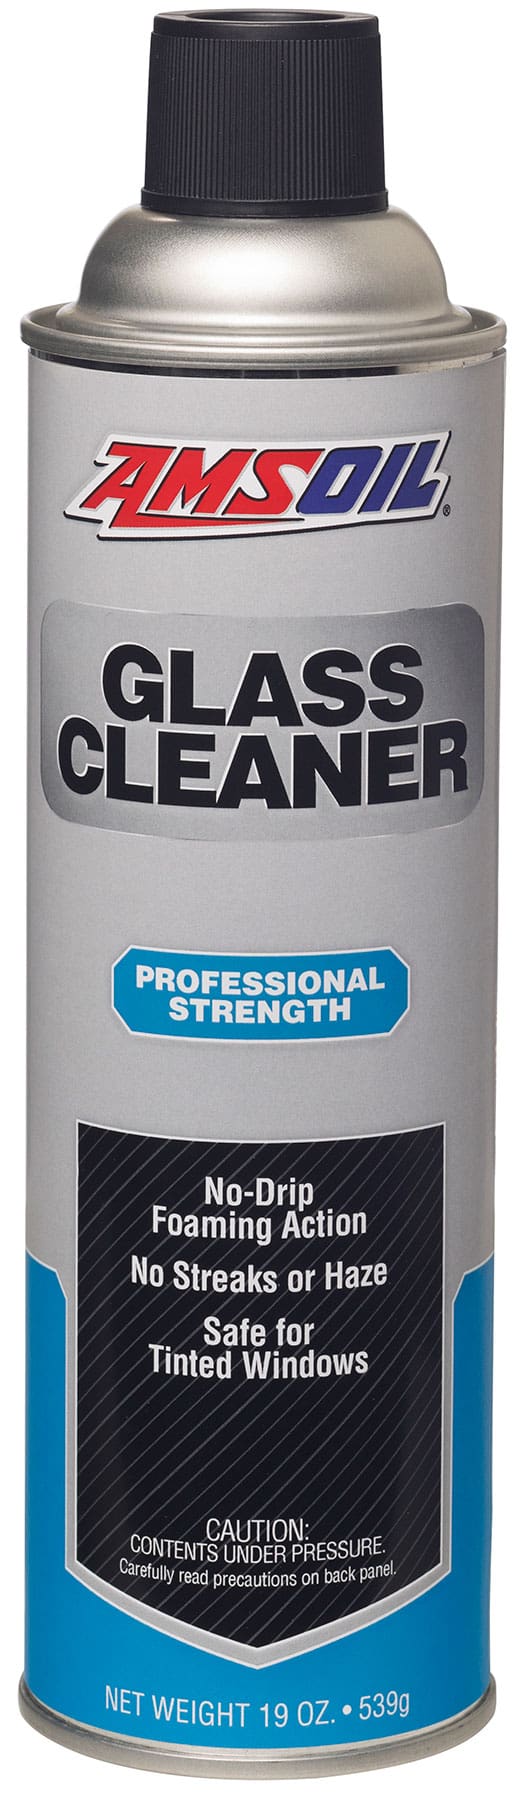 Glass Cleaner AGCSC